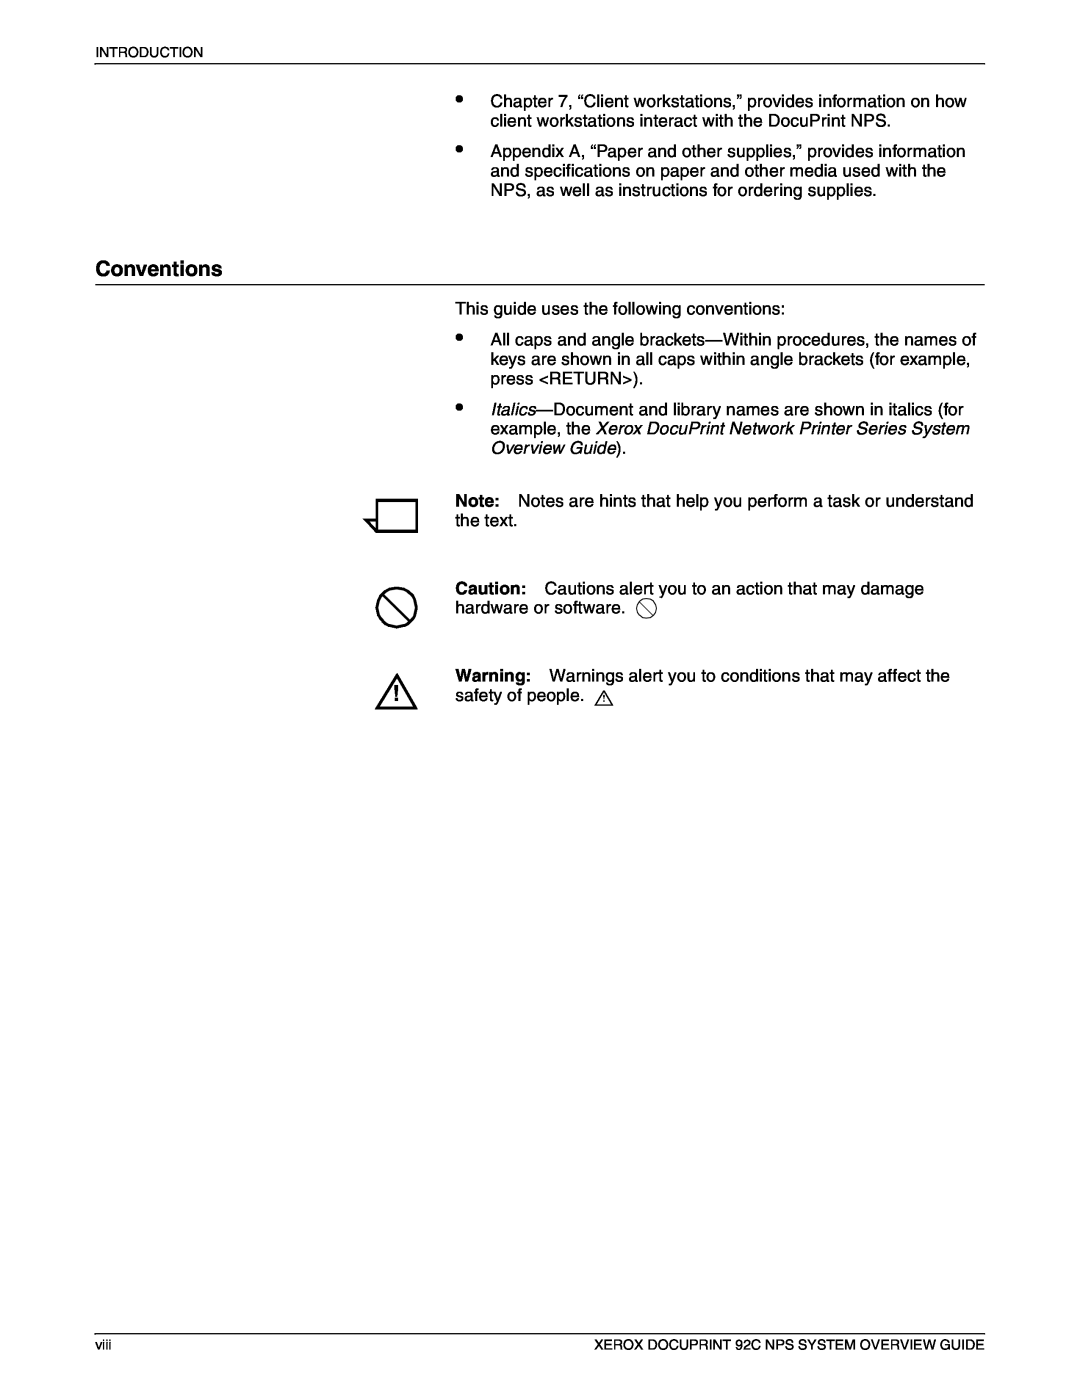 Xerox 92C NPS manual Conventions 